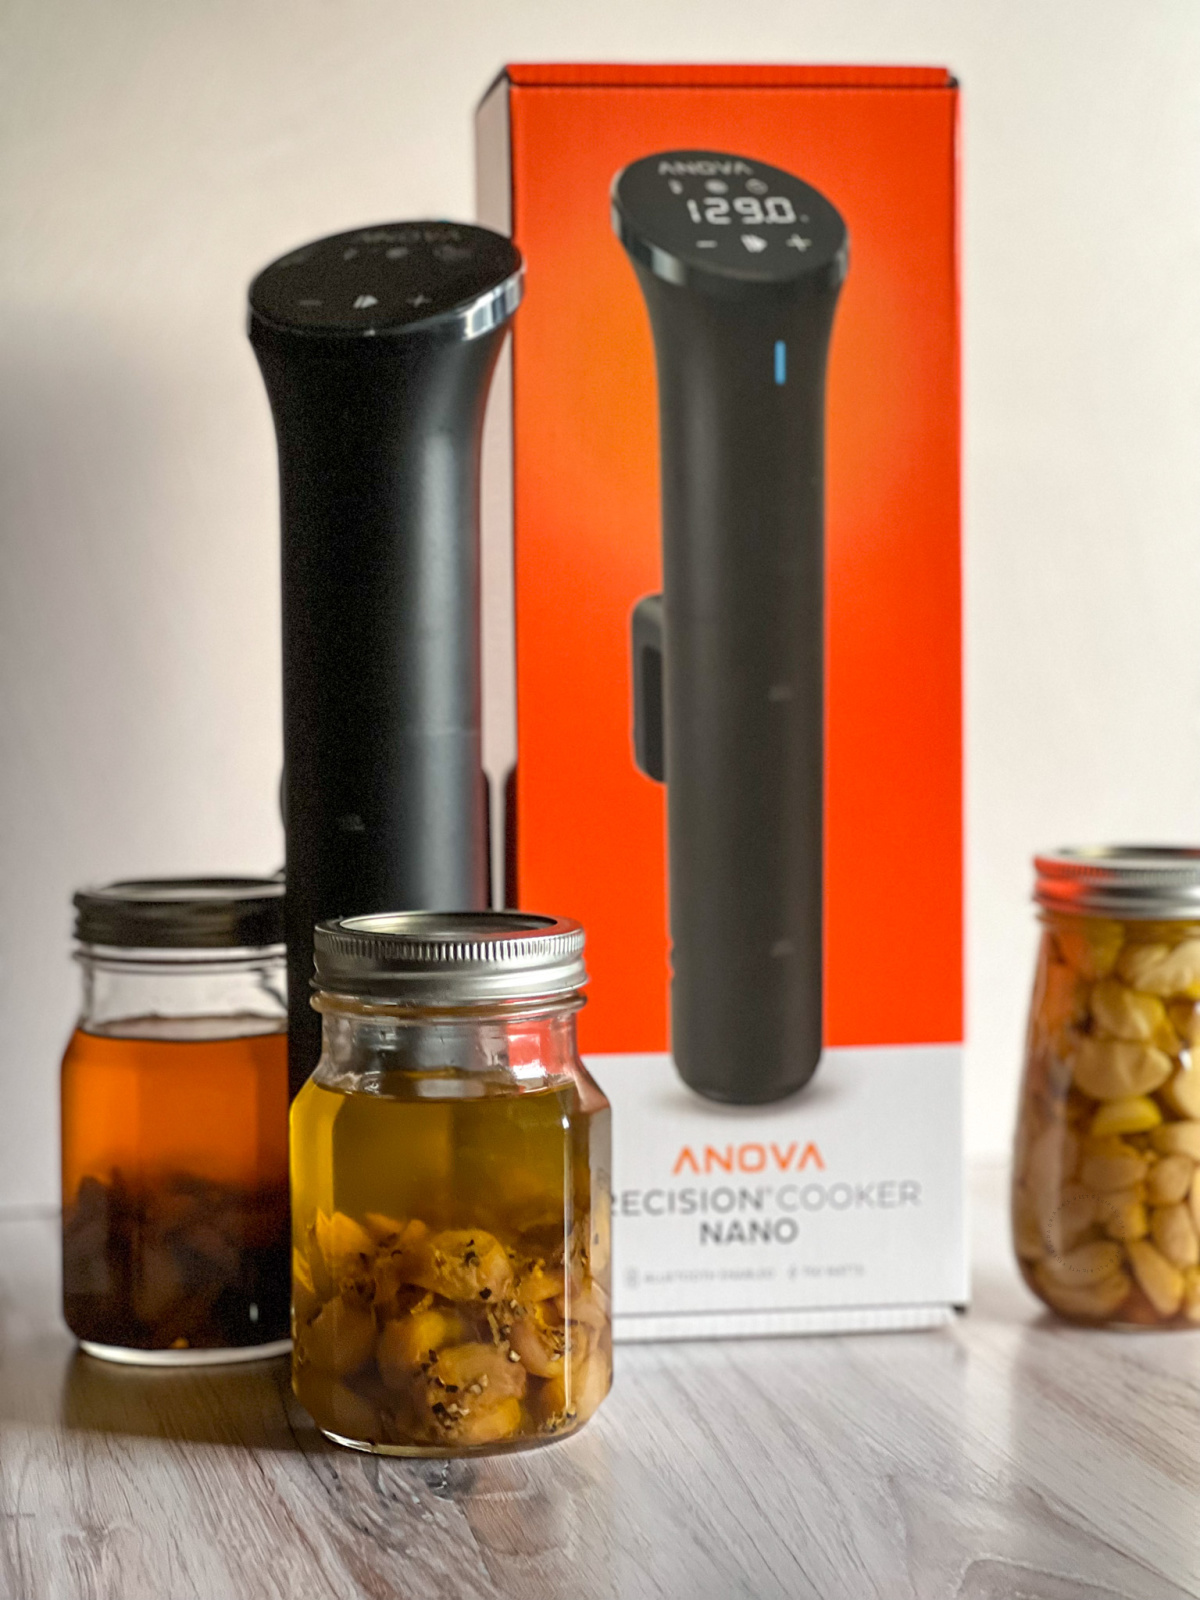 Garlic confit and infused olive oil made with the Anova Precision Cooker